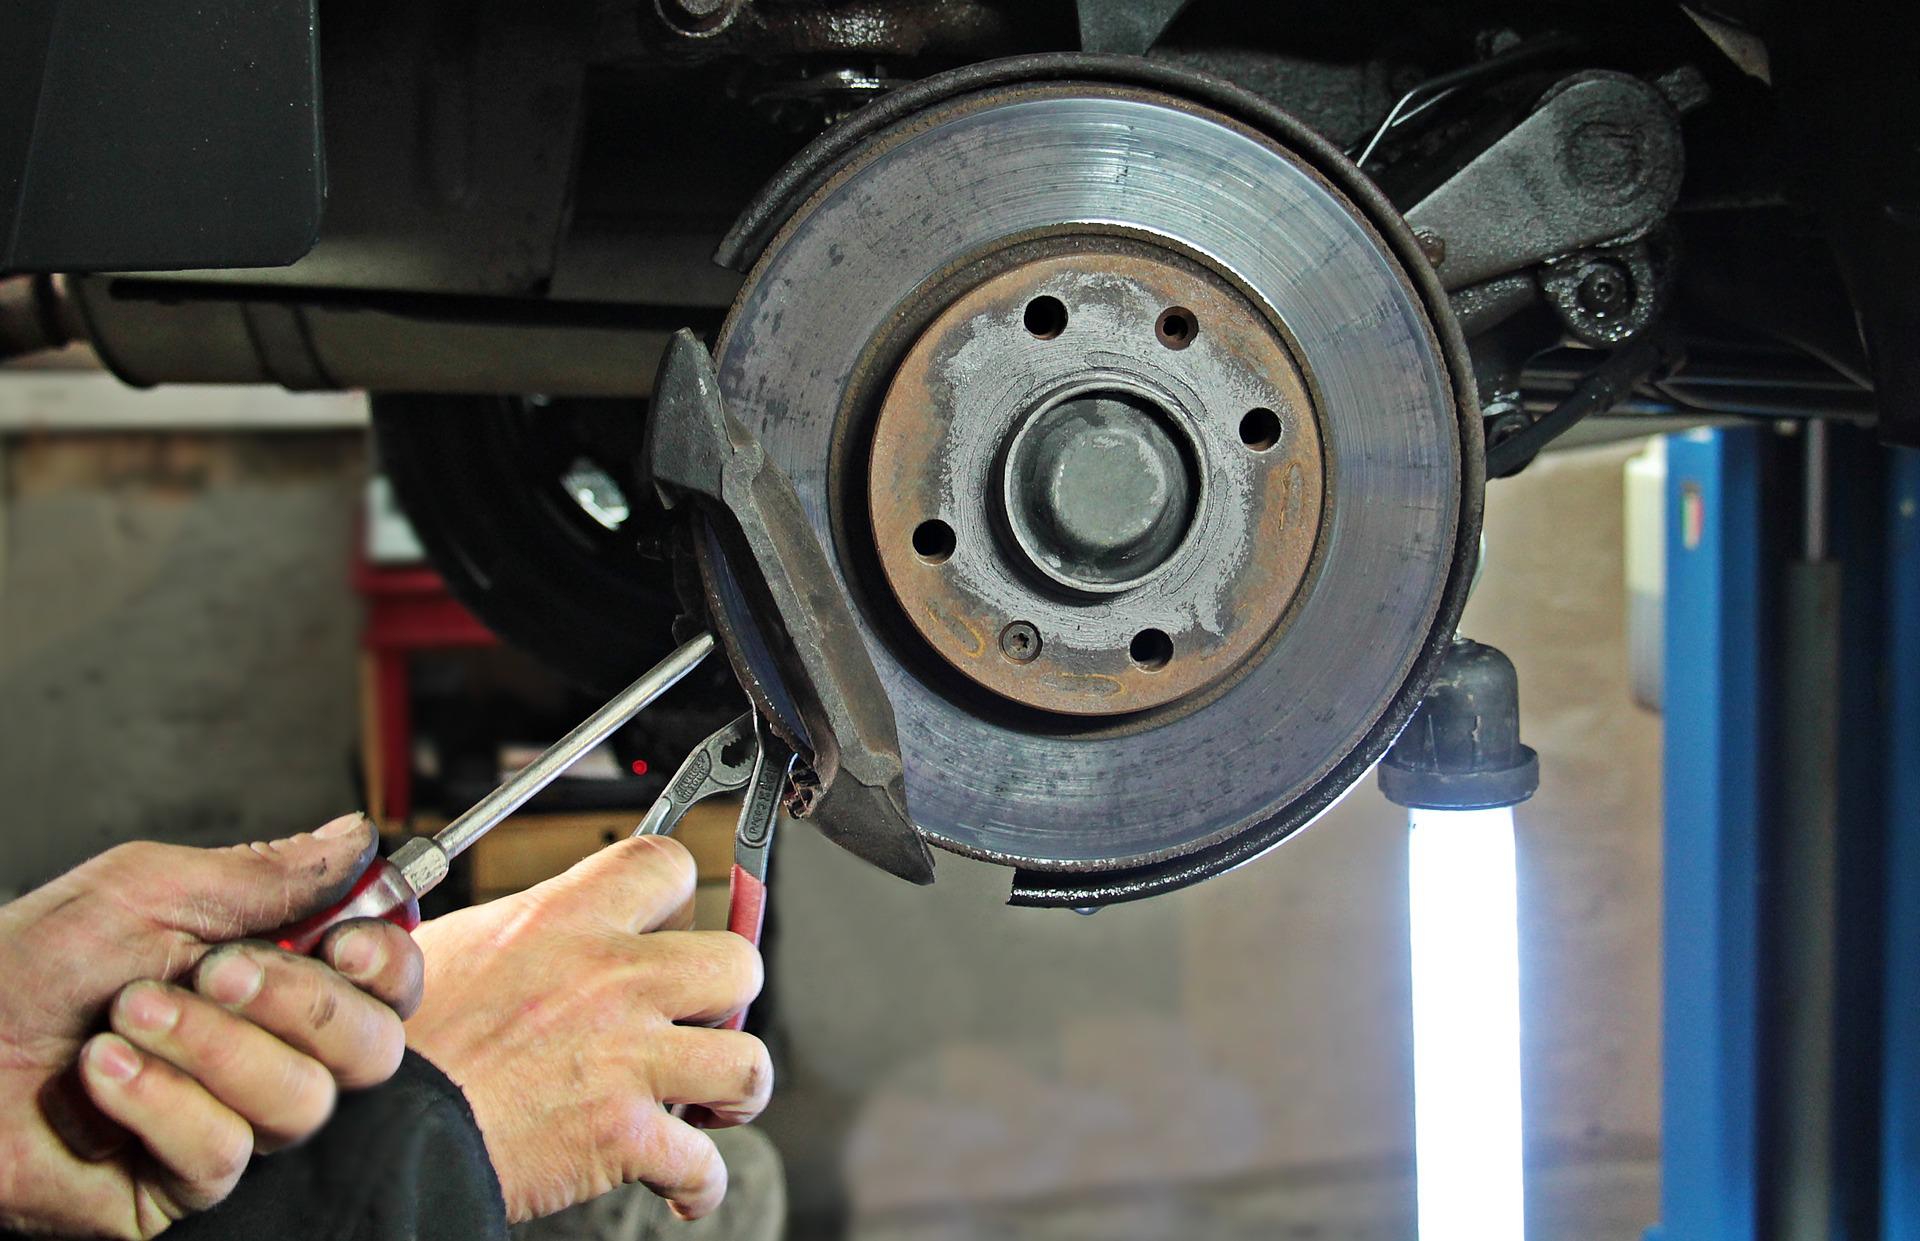 A brake pad being worked on